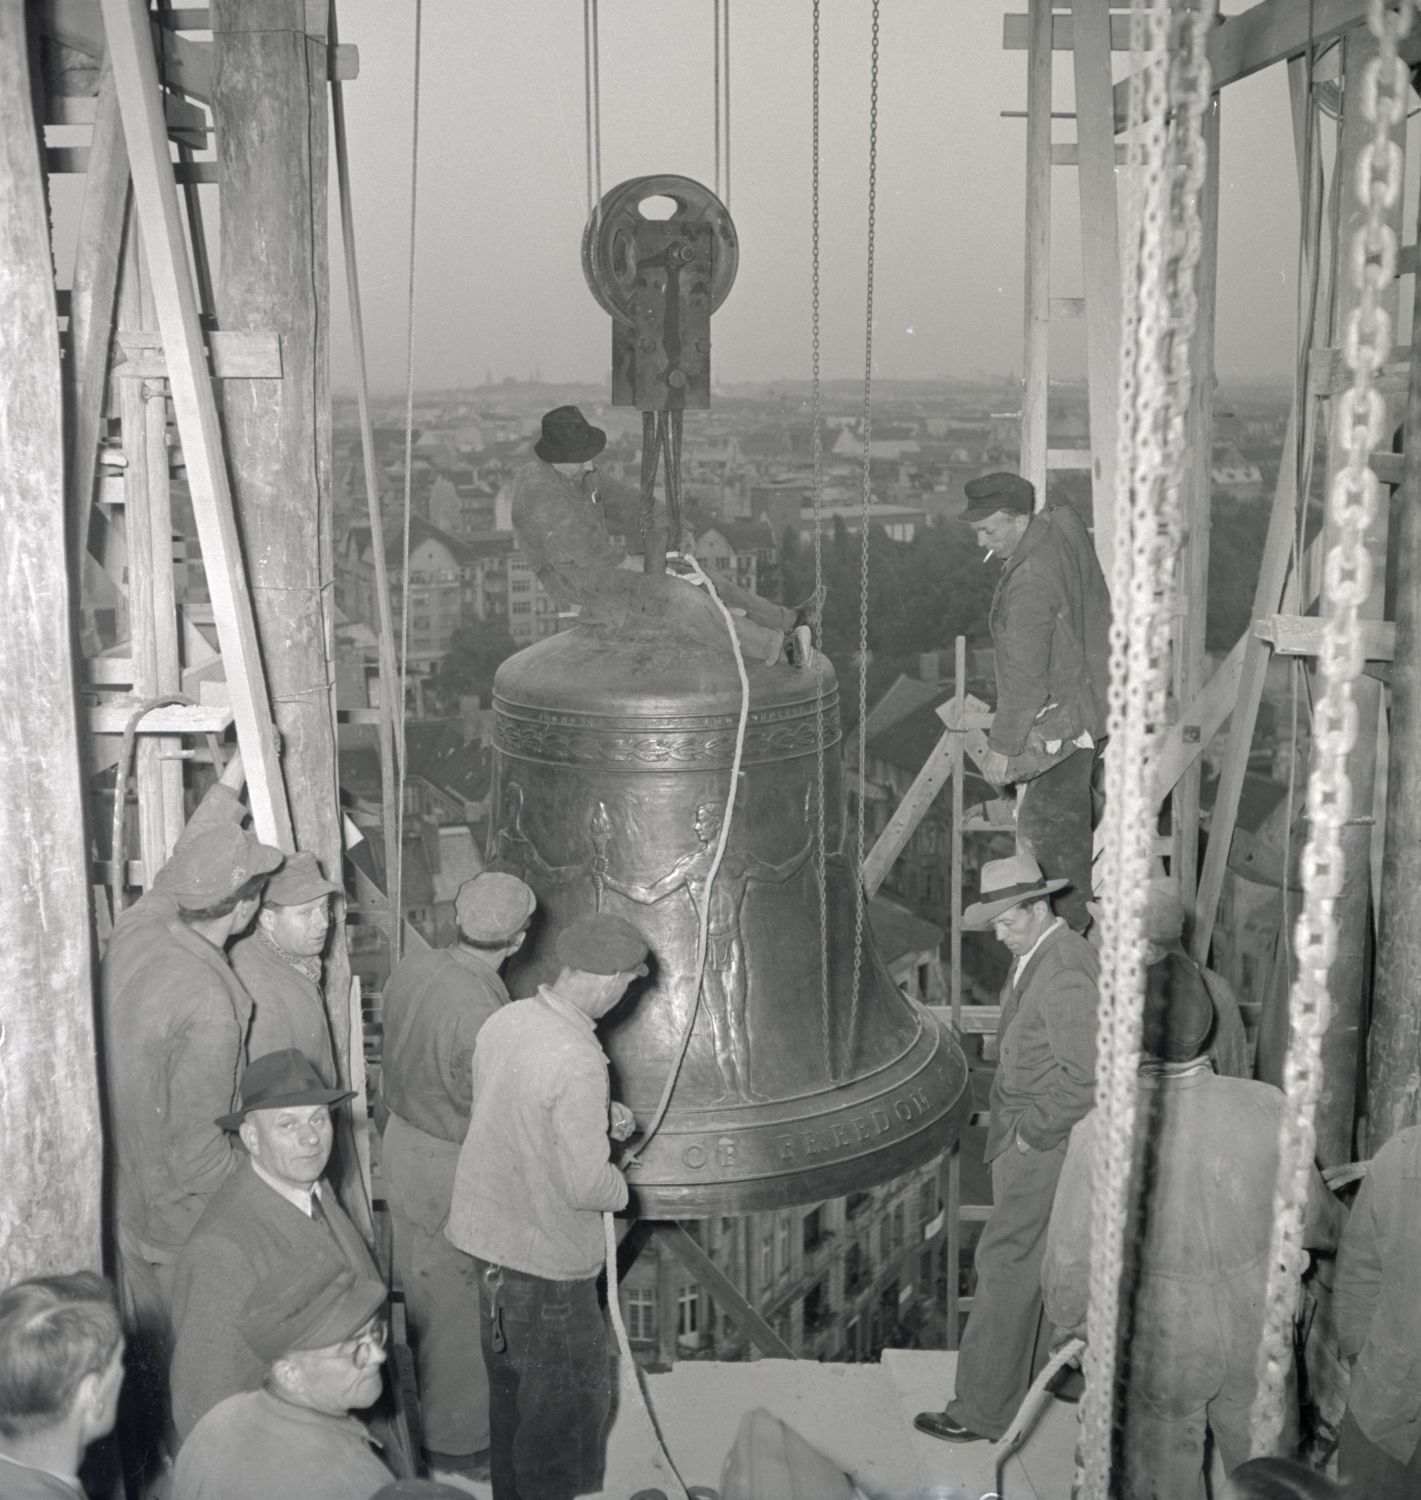 Several men are pulling a large bell into a bellfry using a winch. In the background are the roofs of a big city.